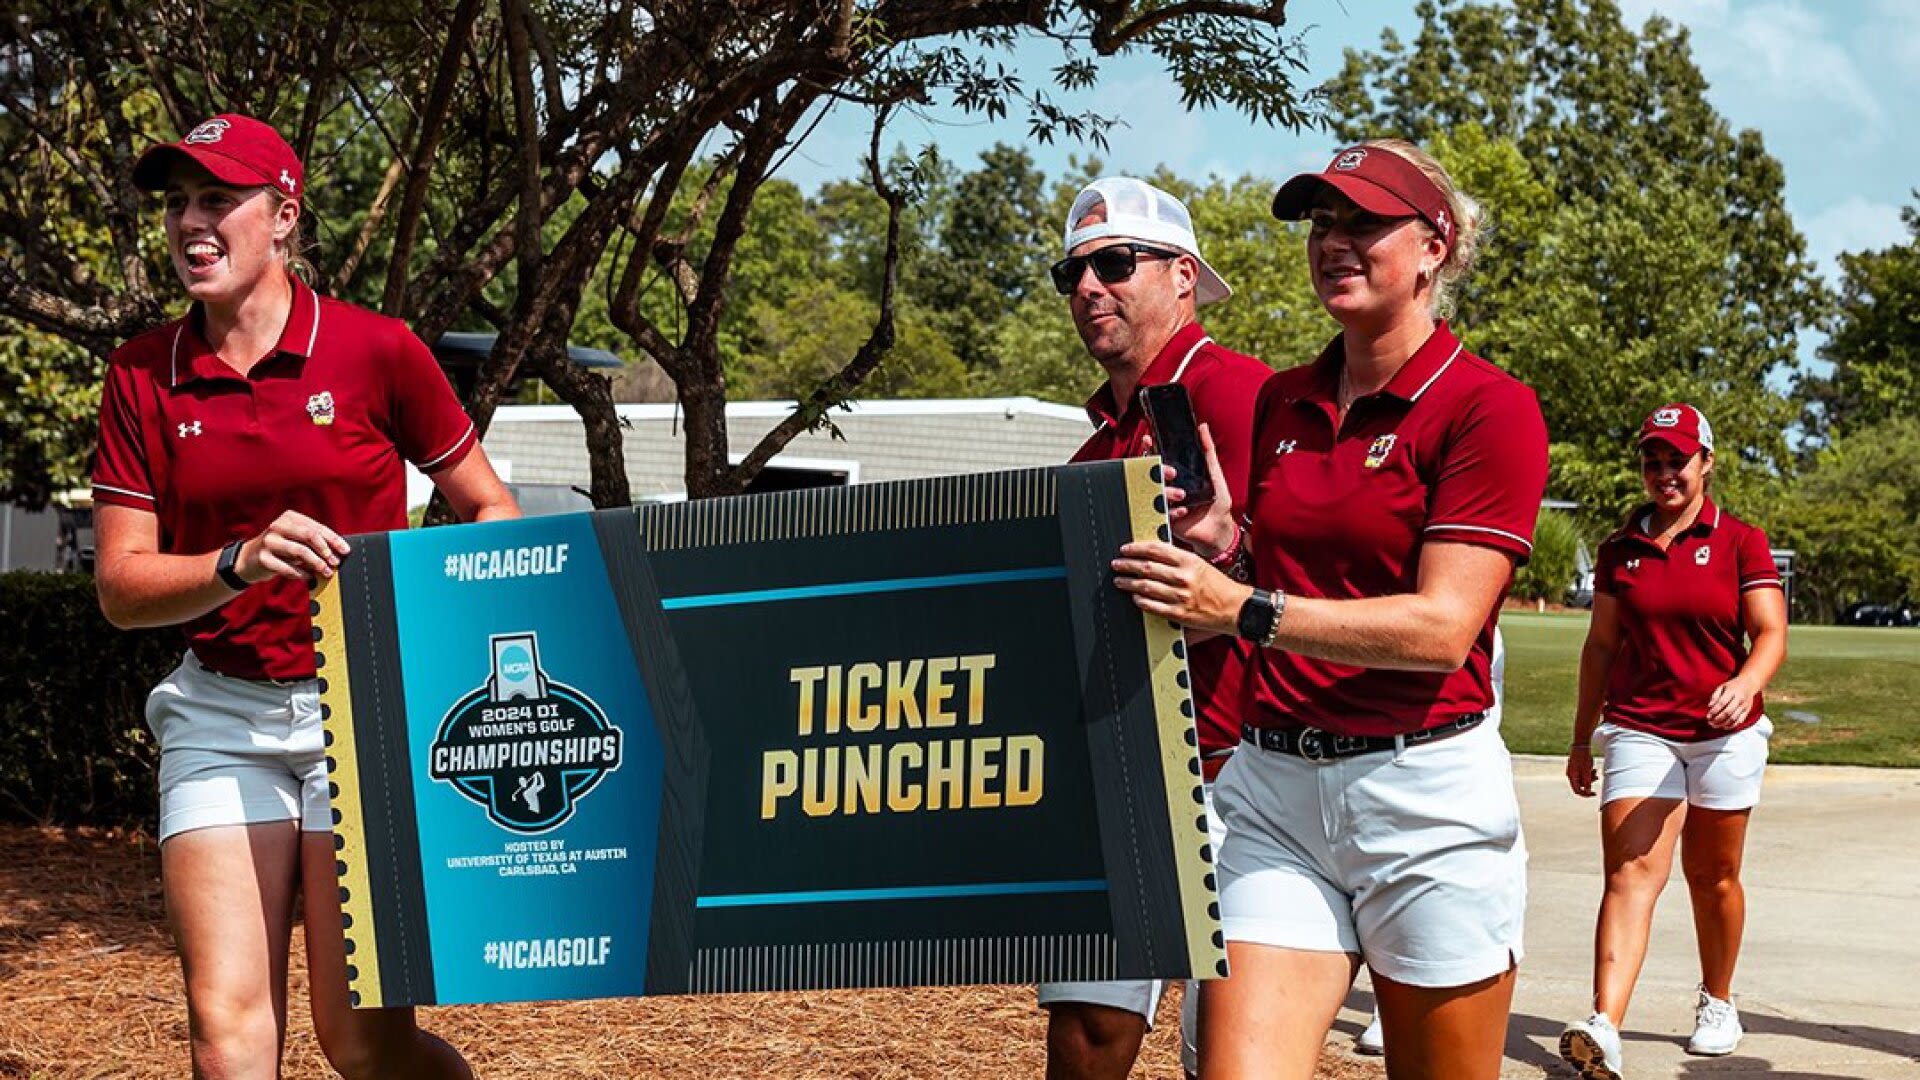 NCAA women's regionals: South Carolina survives; Rachel Heck's victory paces Stanford